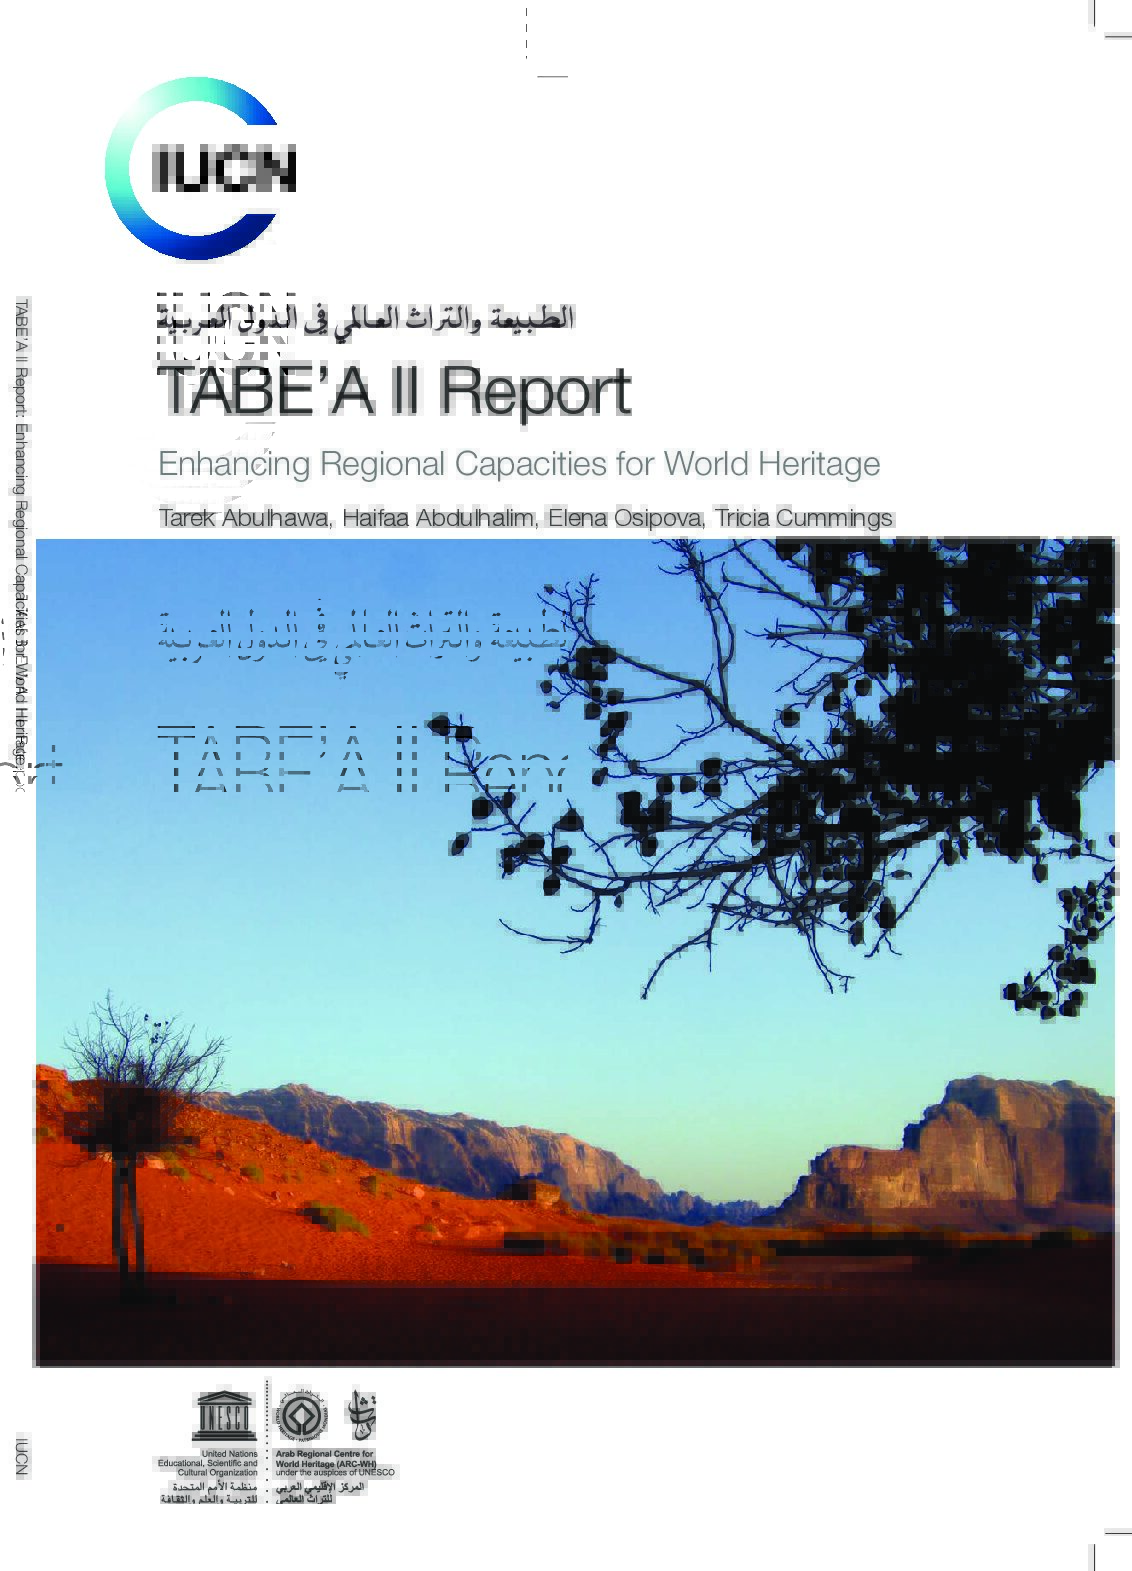 Tabe'a II Report - Enhancing Regional Capacities for World Heritage